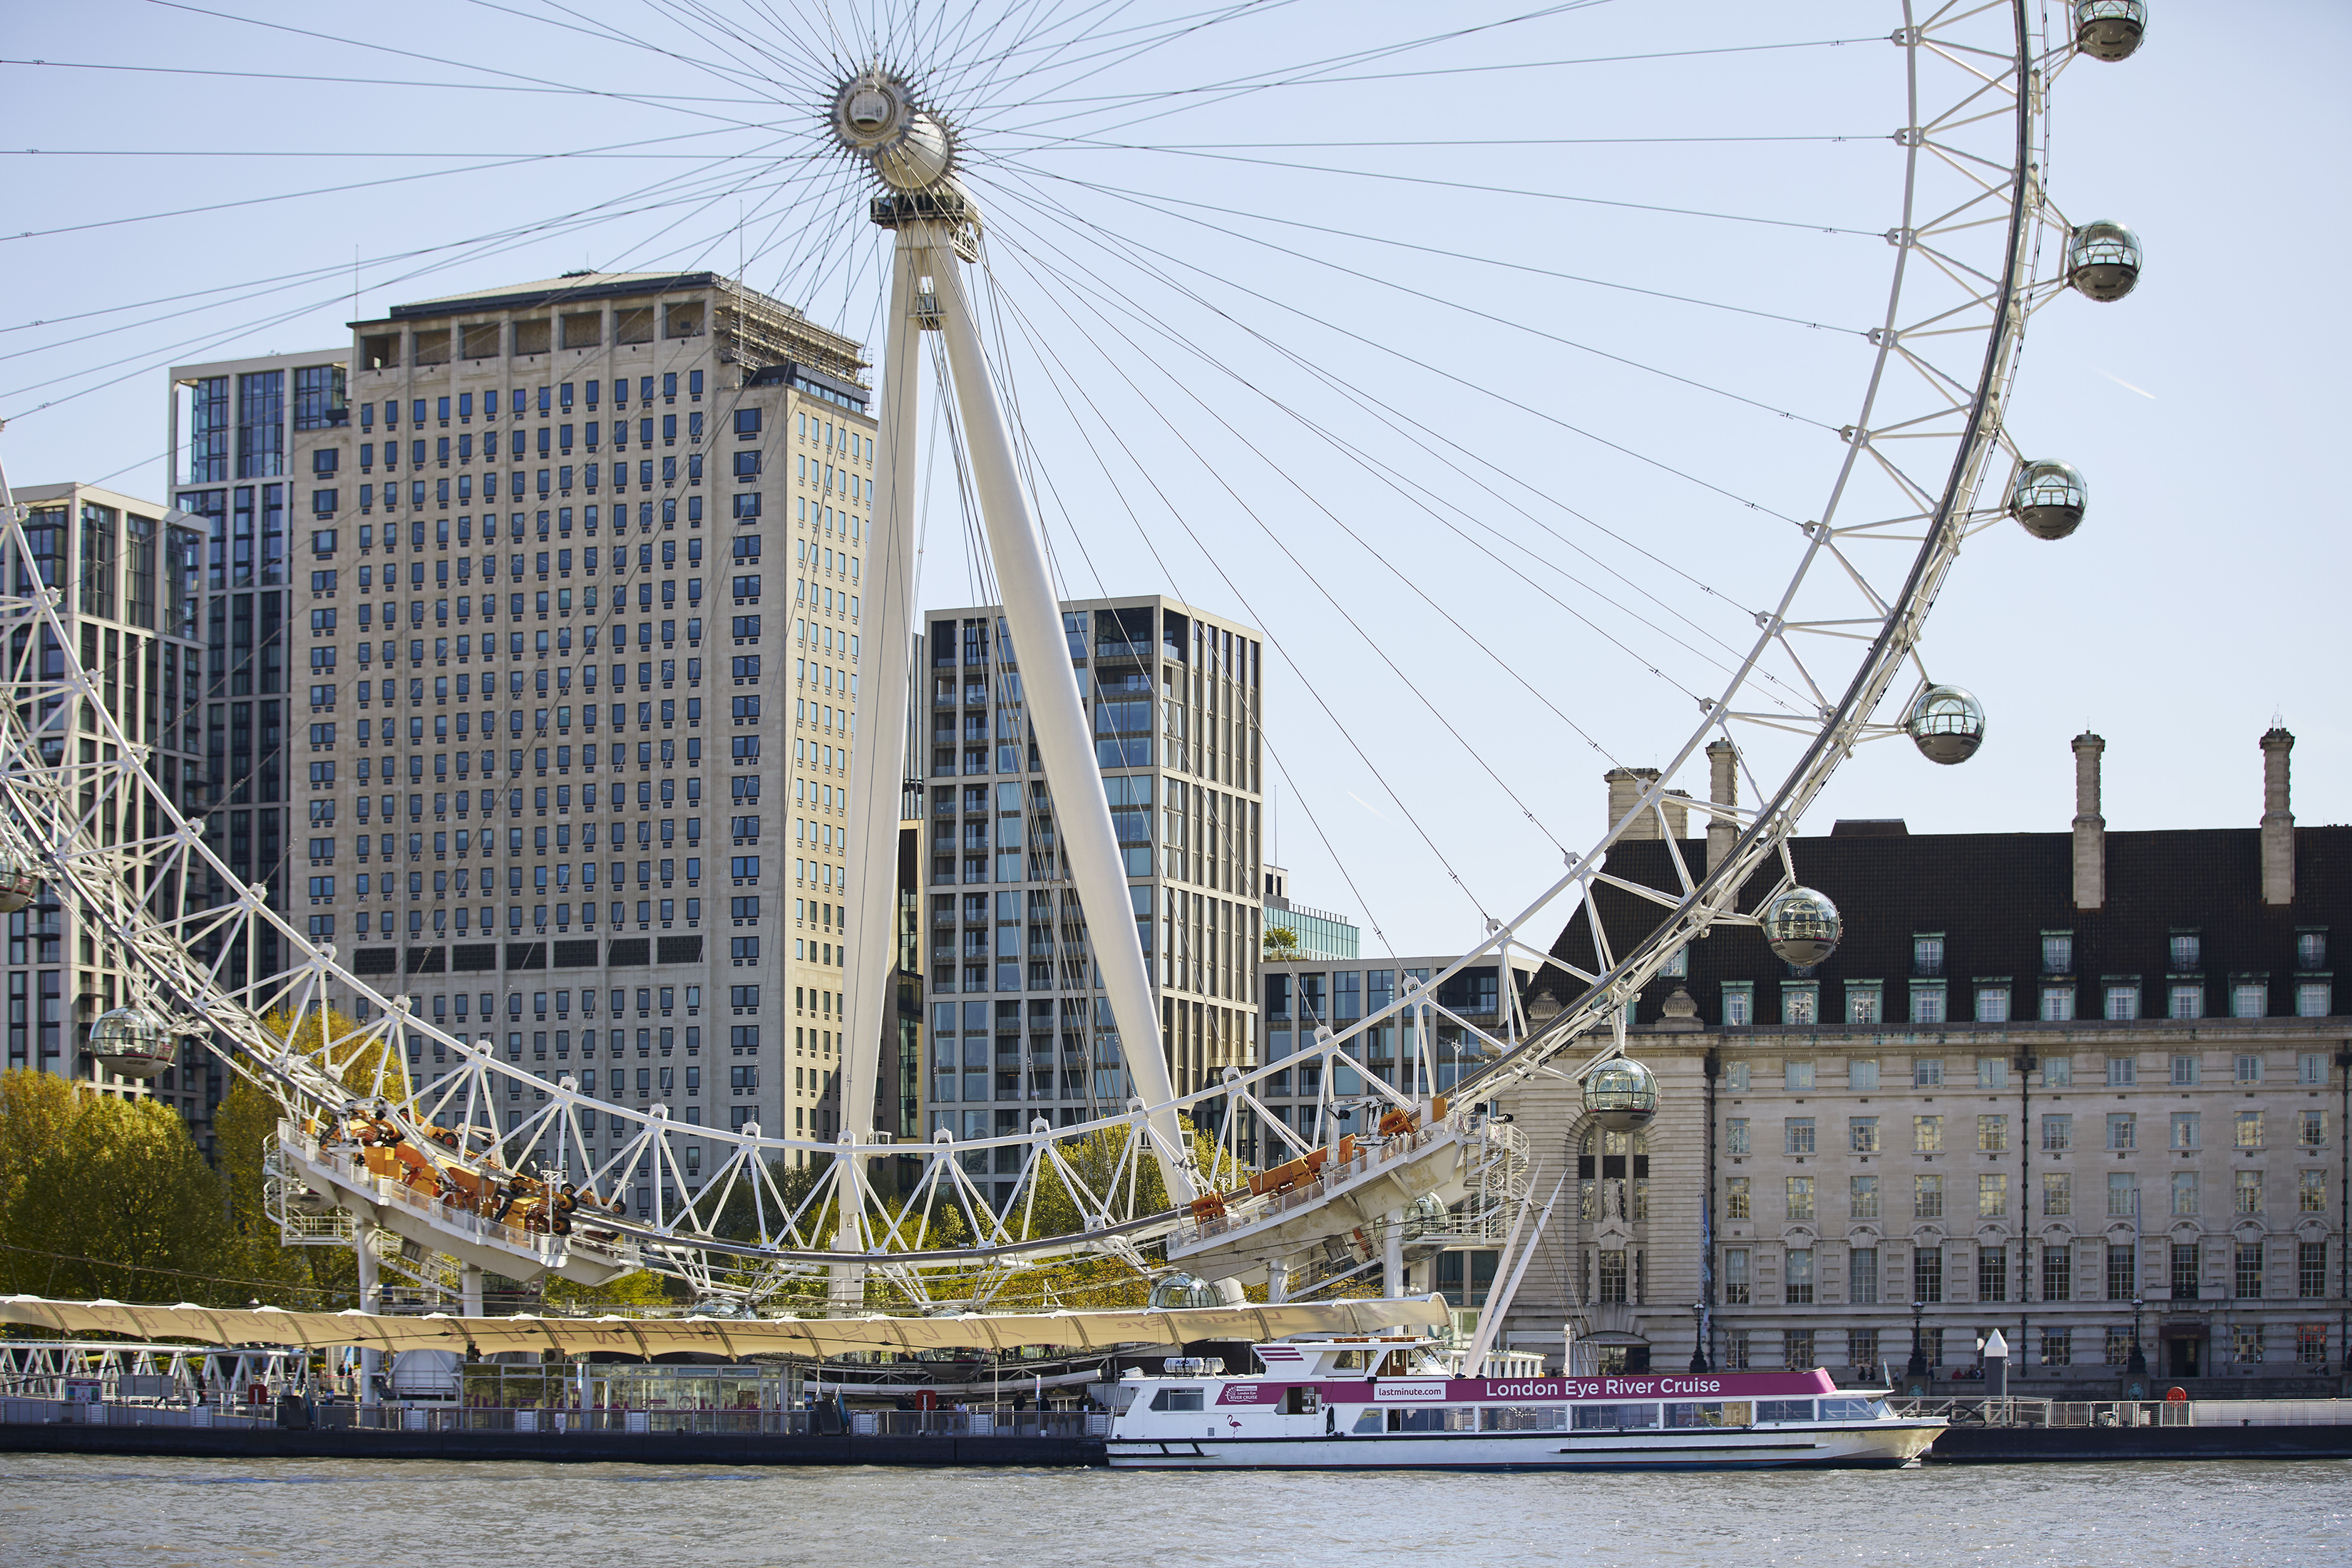 The London Eye and the River Cruise in London